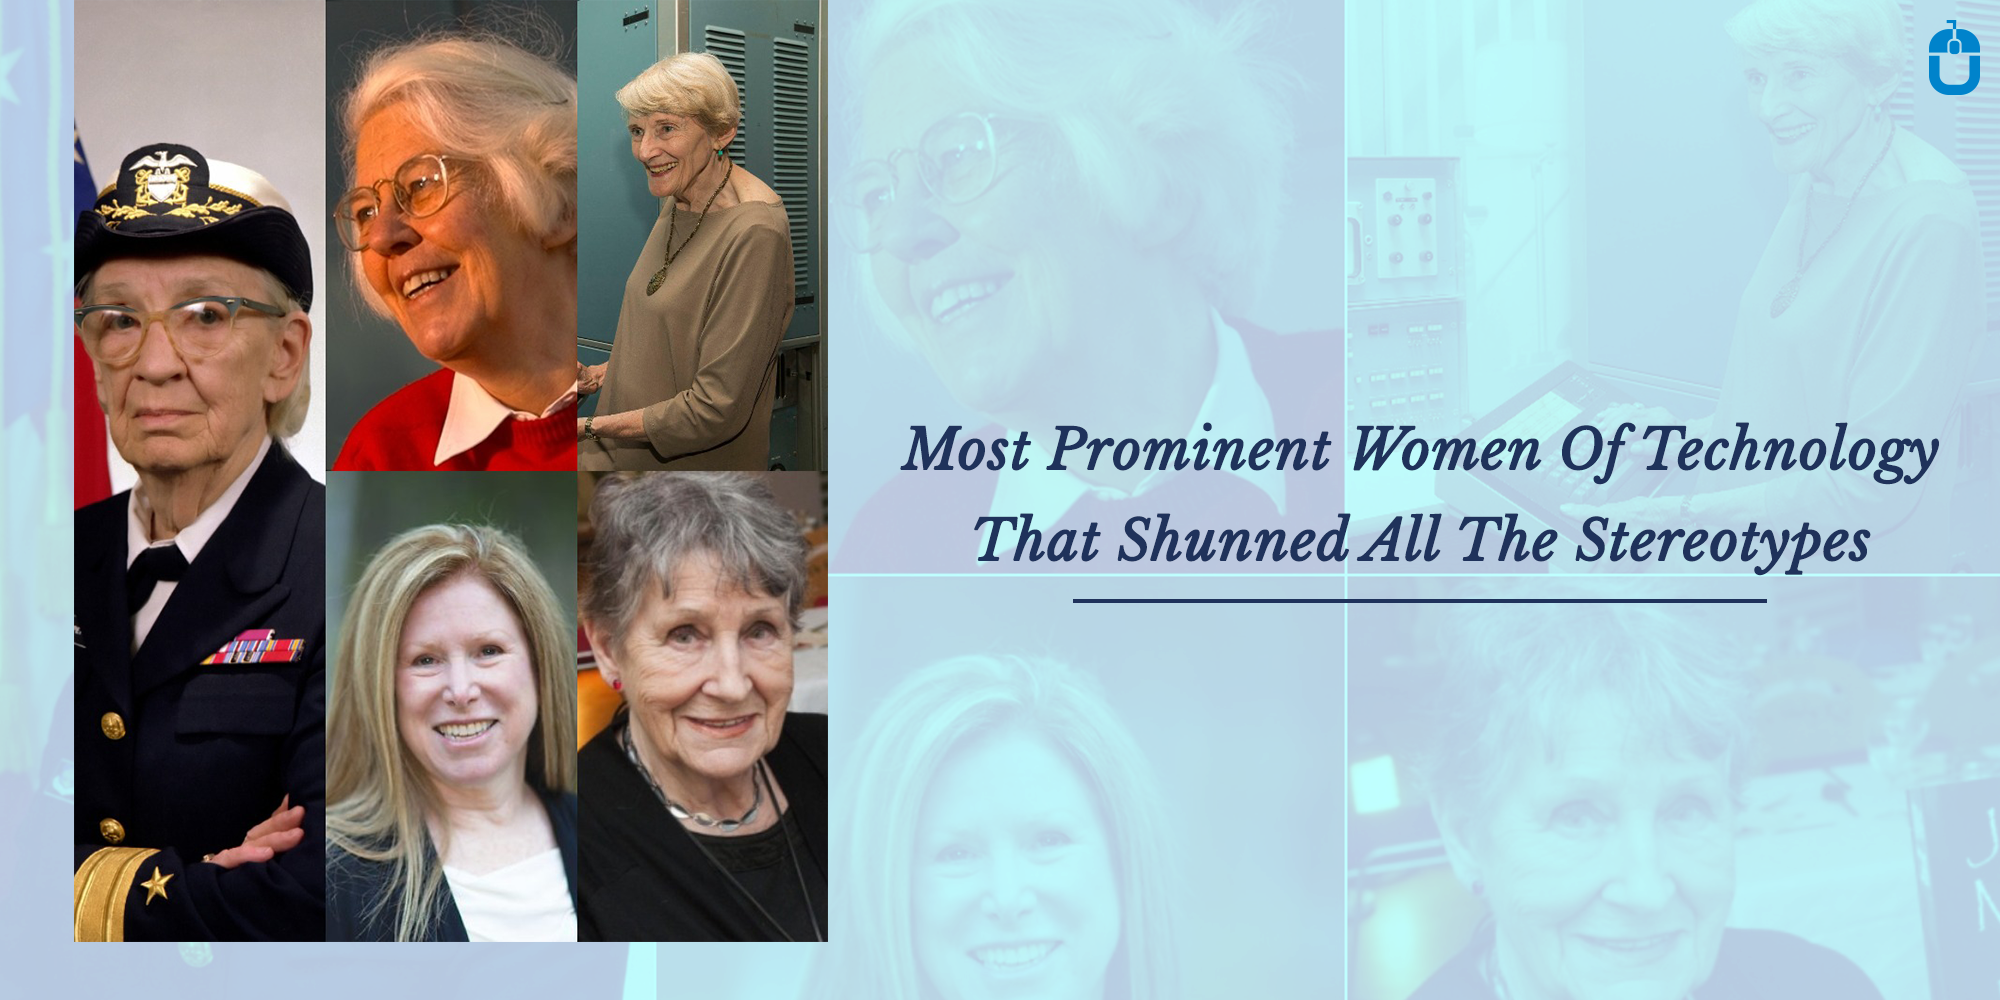 Most Prominent Women Of Technology That Shunned All The Stereotypes